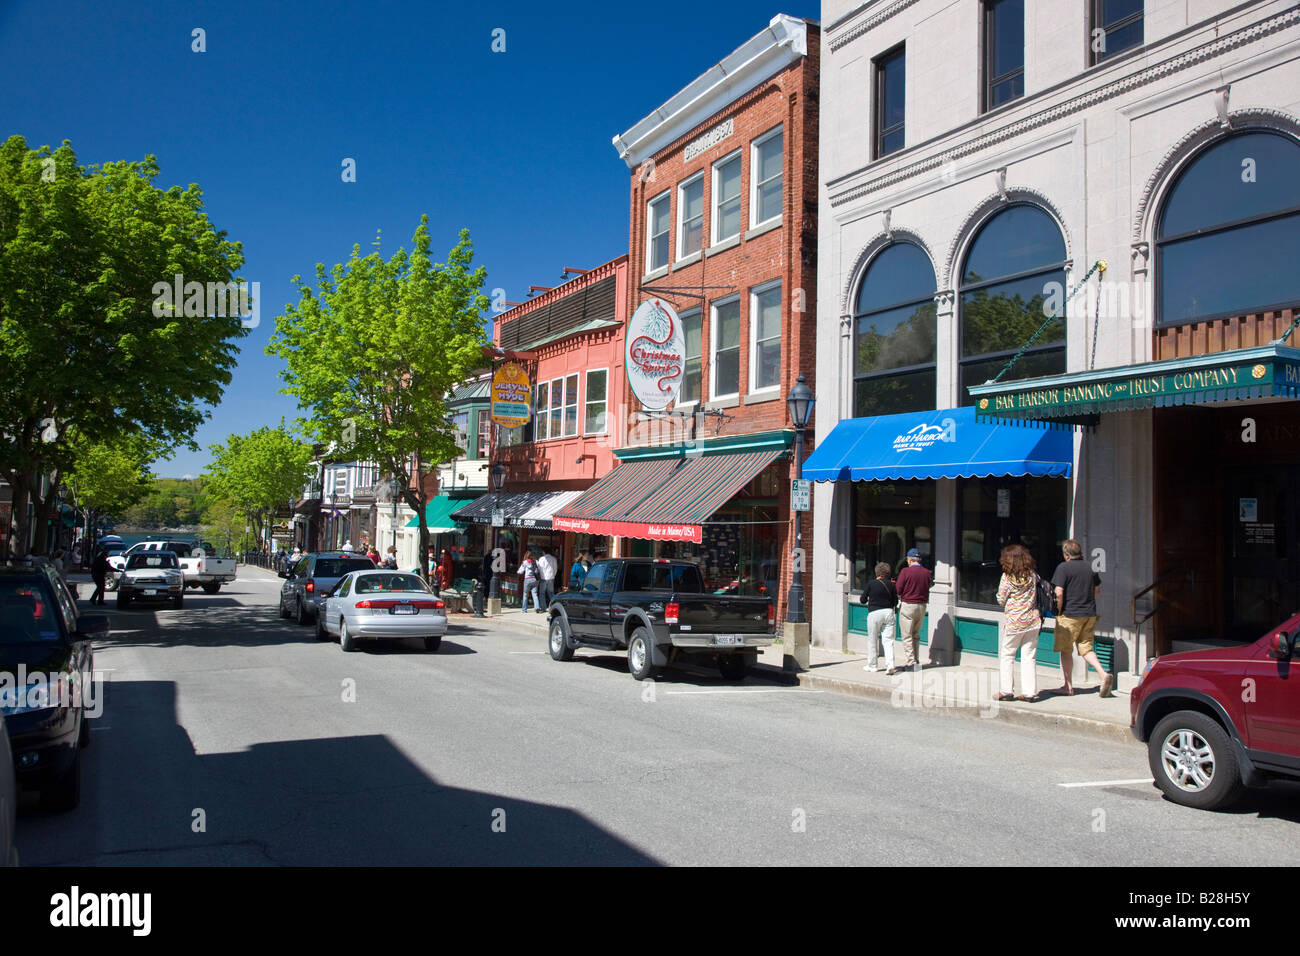 Shops in the town of Bar Harbor, ME Stock Photo